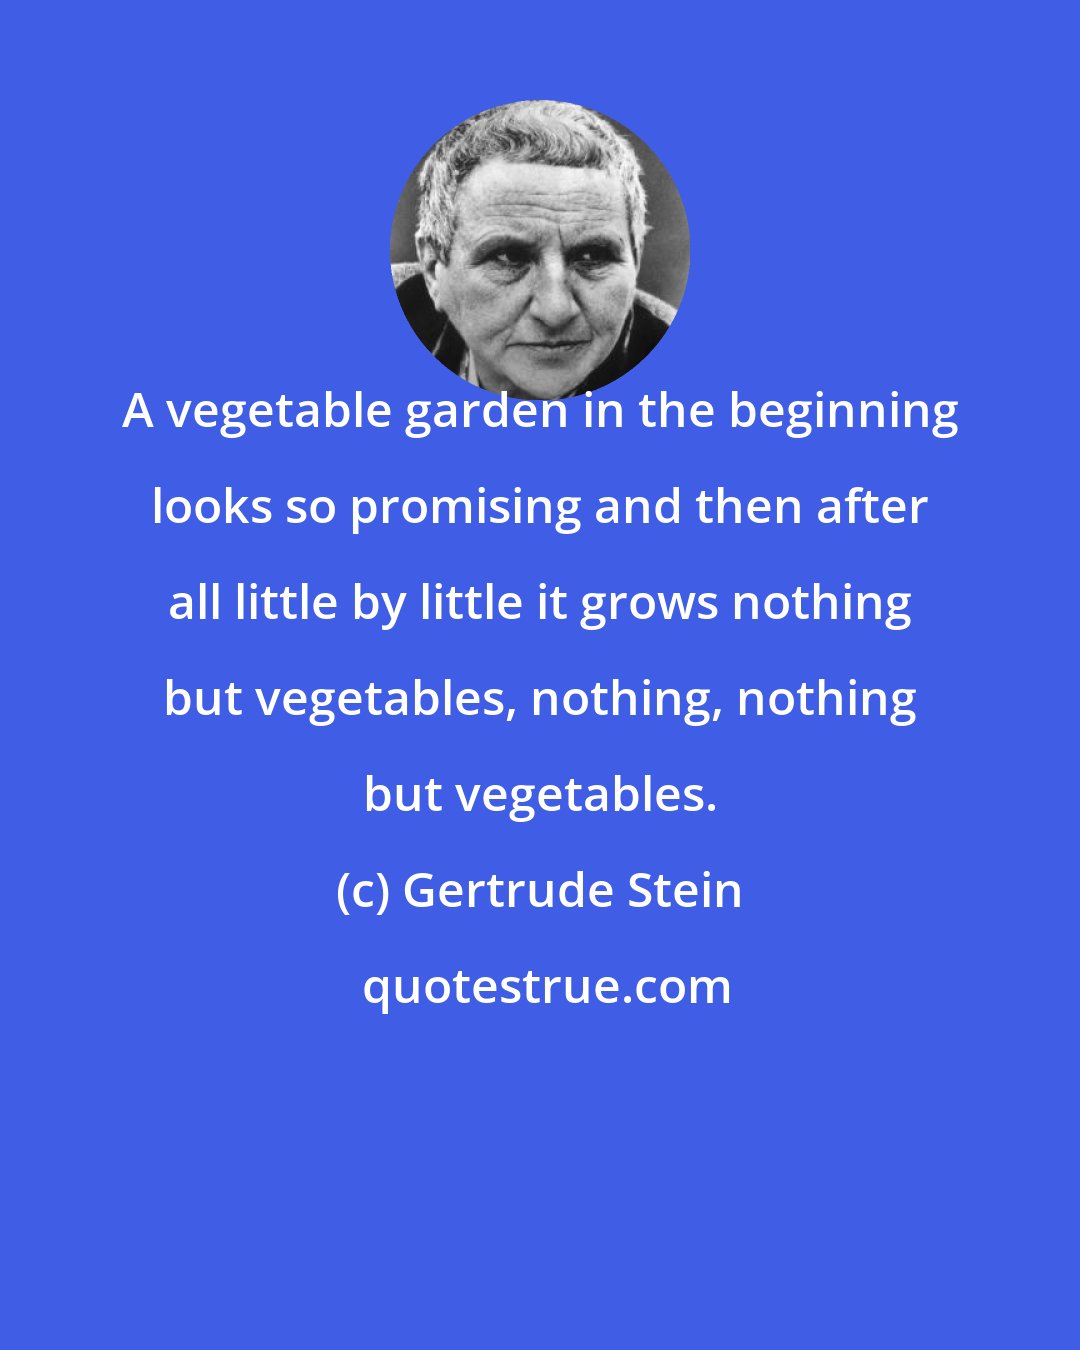 Gertrude Stein: A vegetable garden in the beginning looks so promising and then after all little by little it grows nothing but vegetables, nothing, nothing but vegetables.